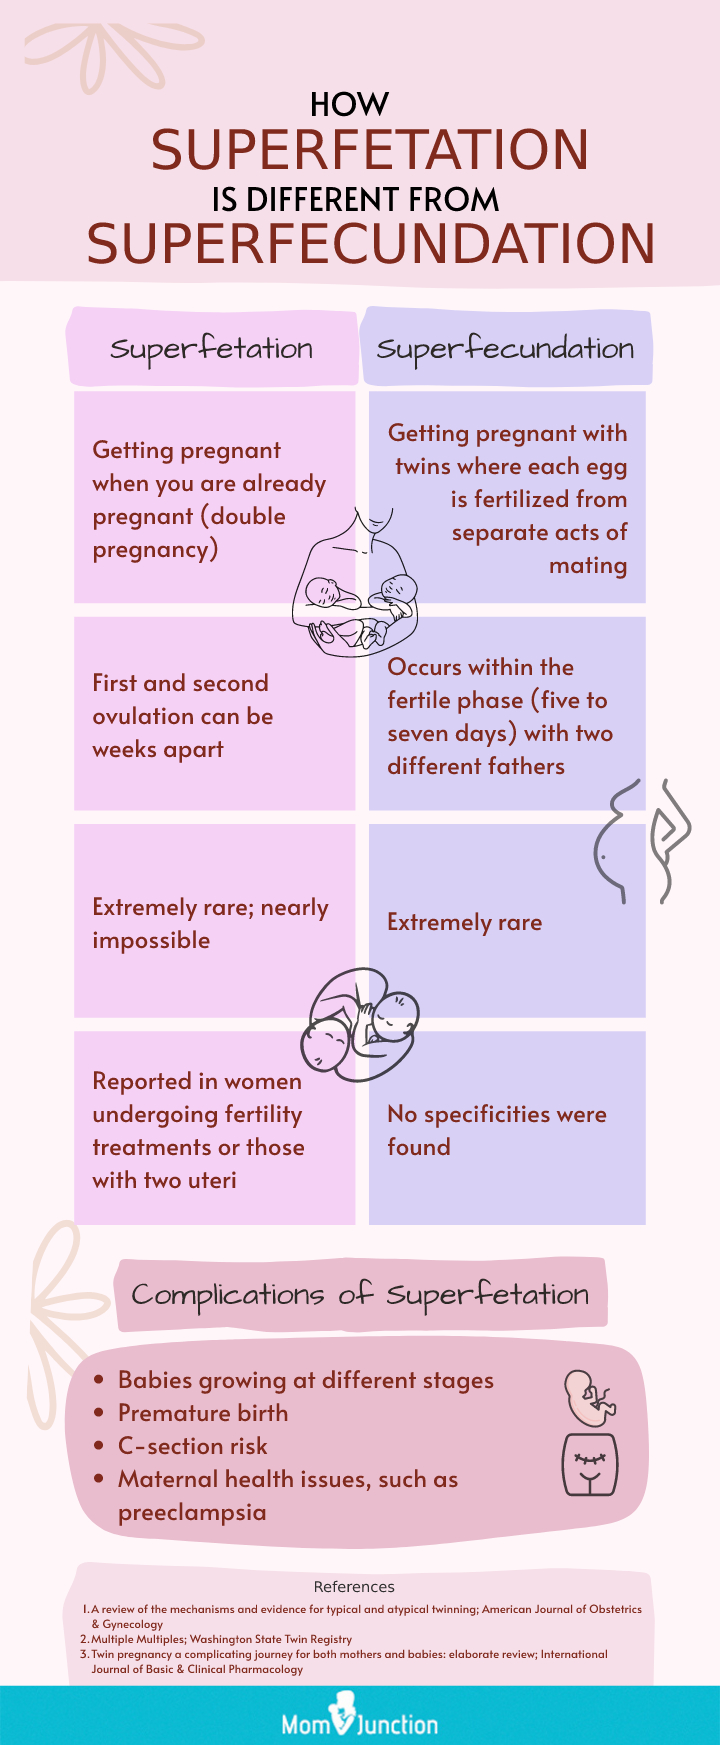 Sperm during pregnancy (infographic)